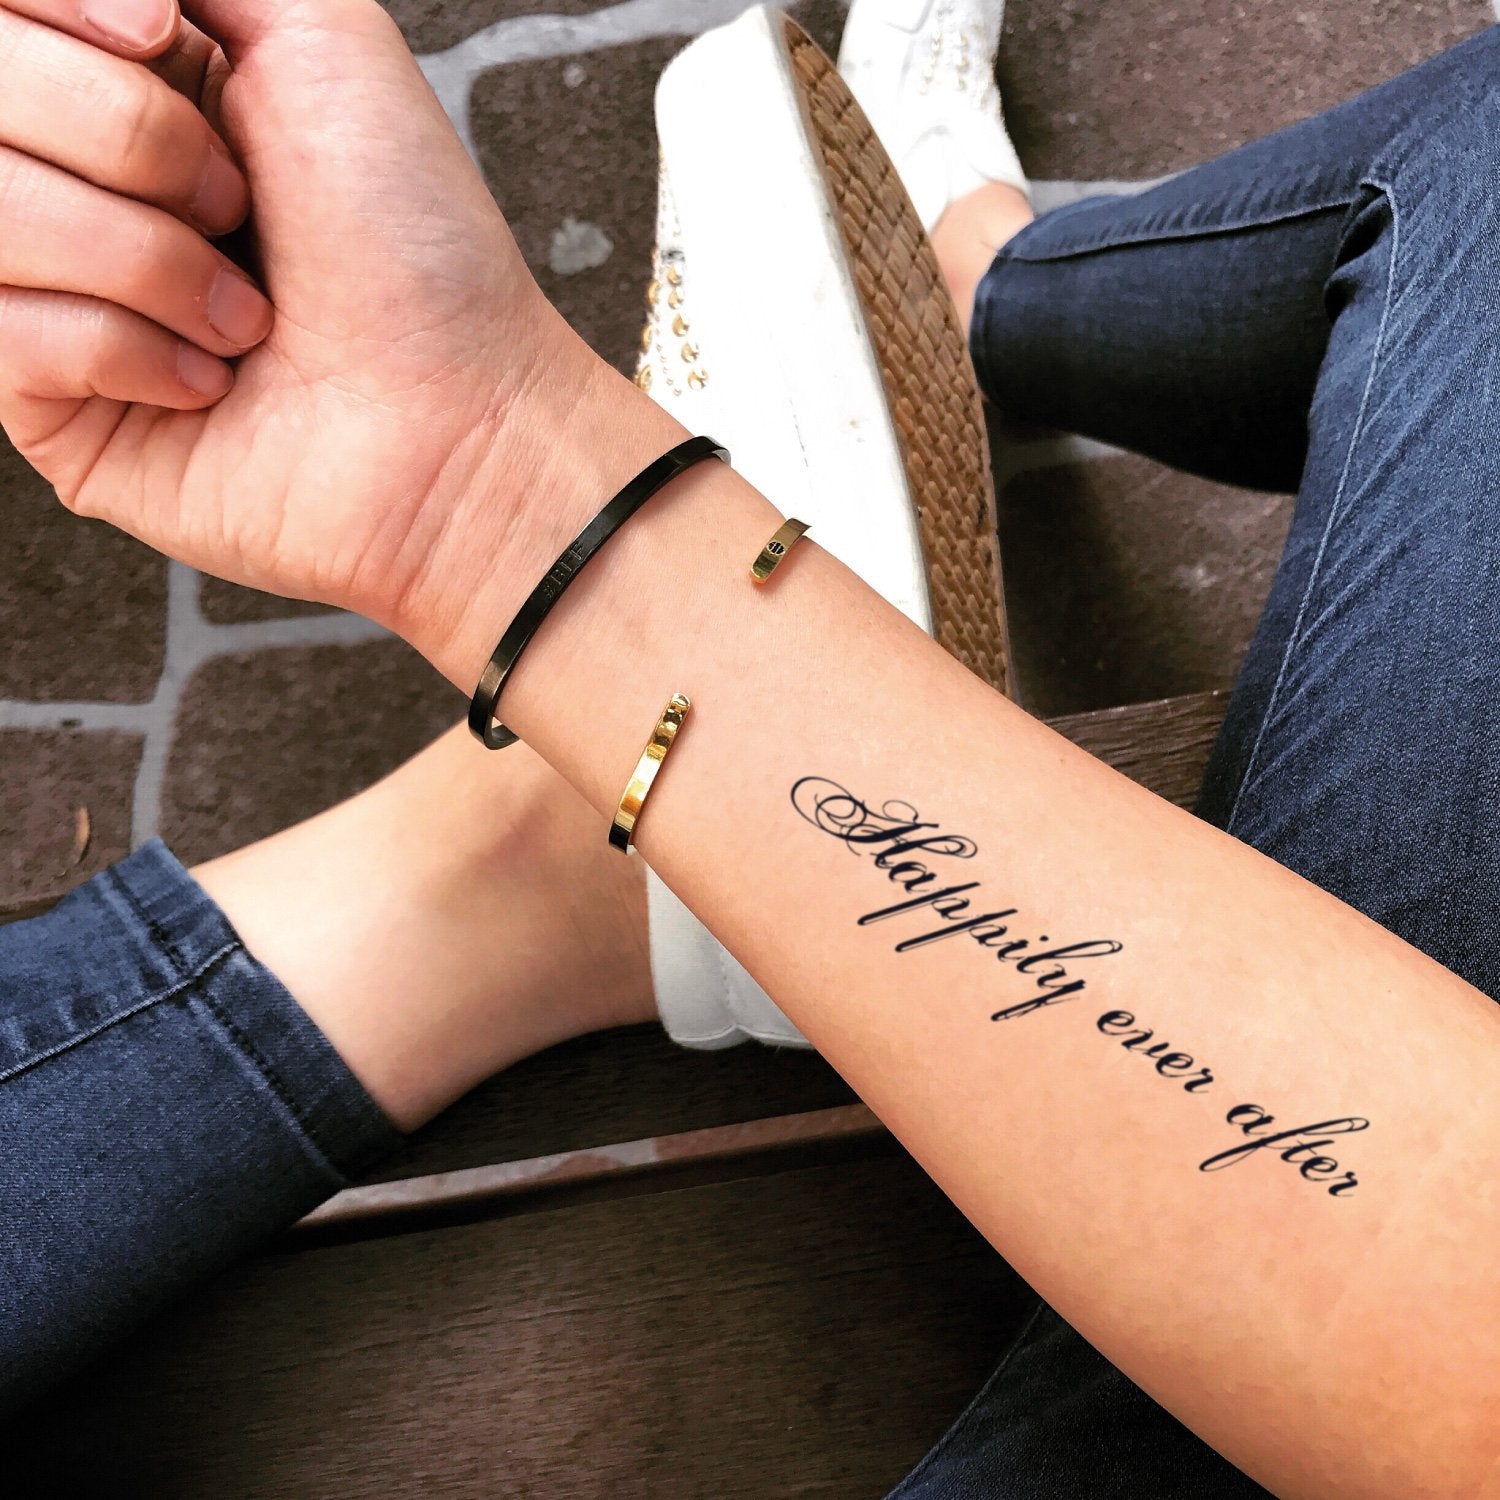 Happily ever after tattoo designs